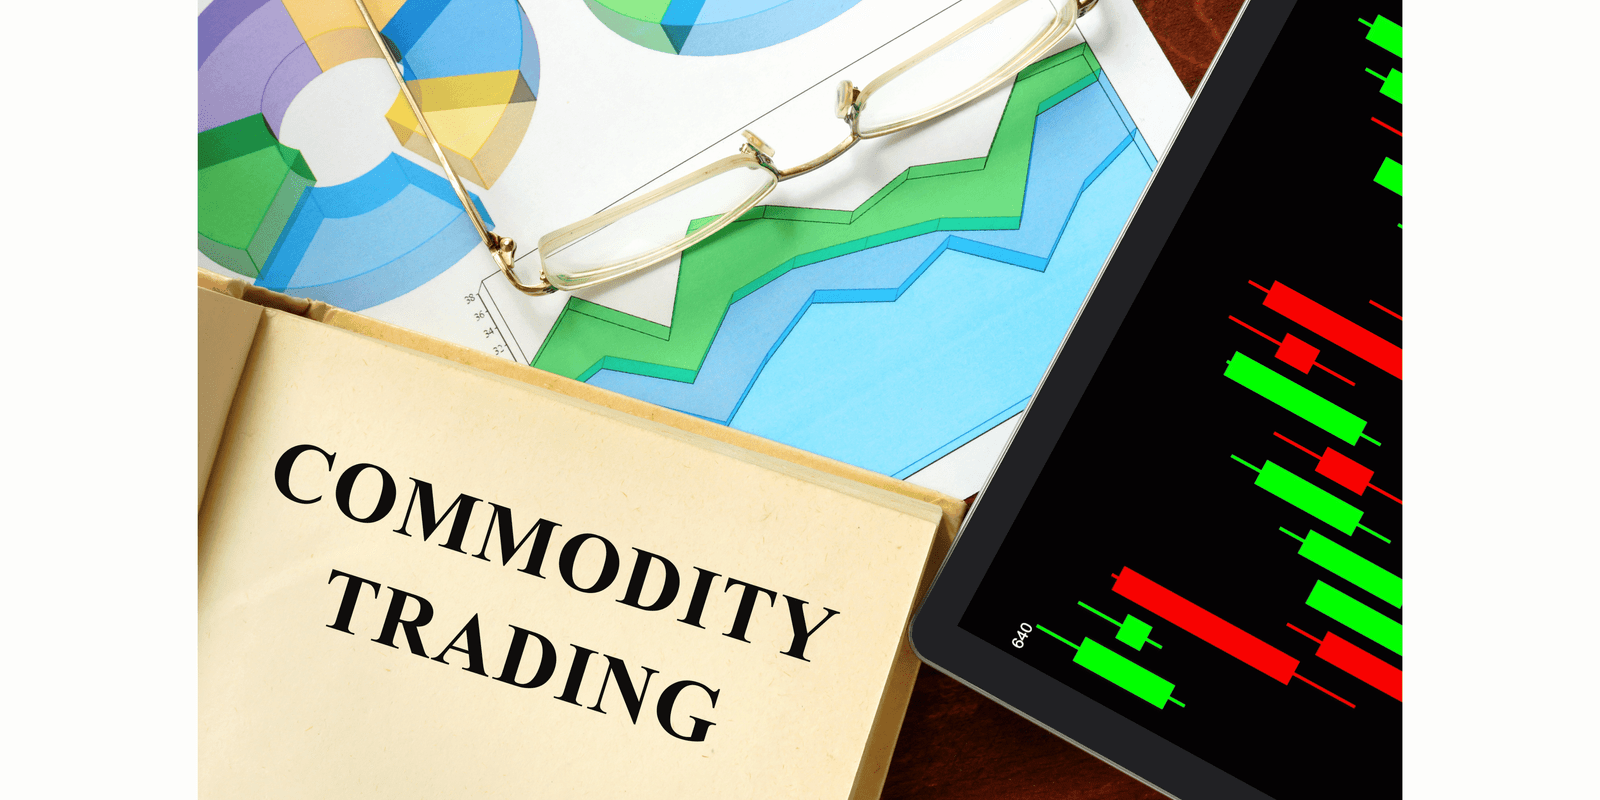 A Basic Guide to Commodity Trading